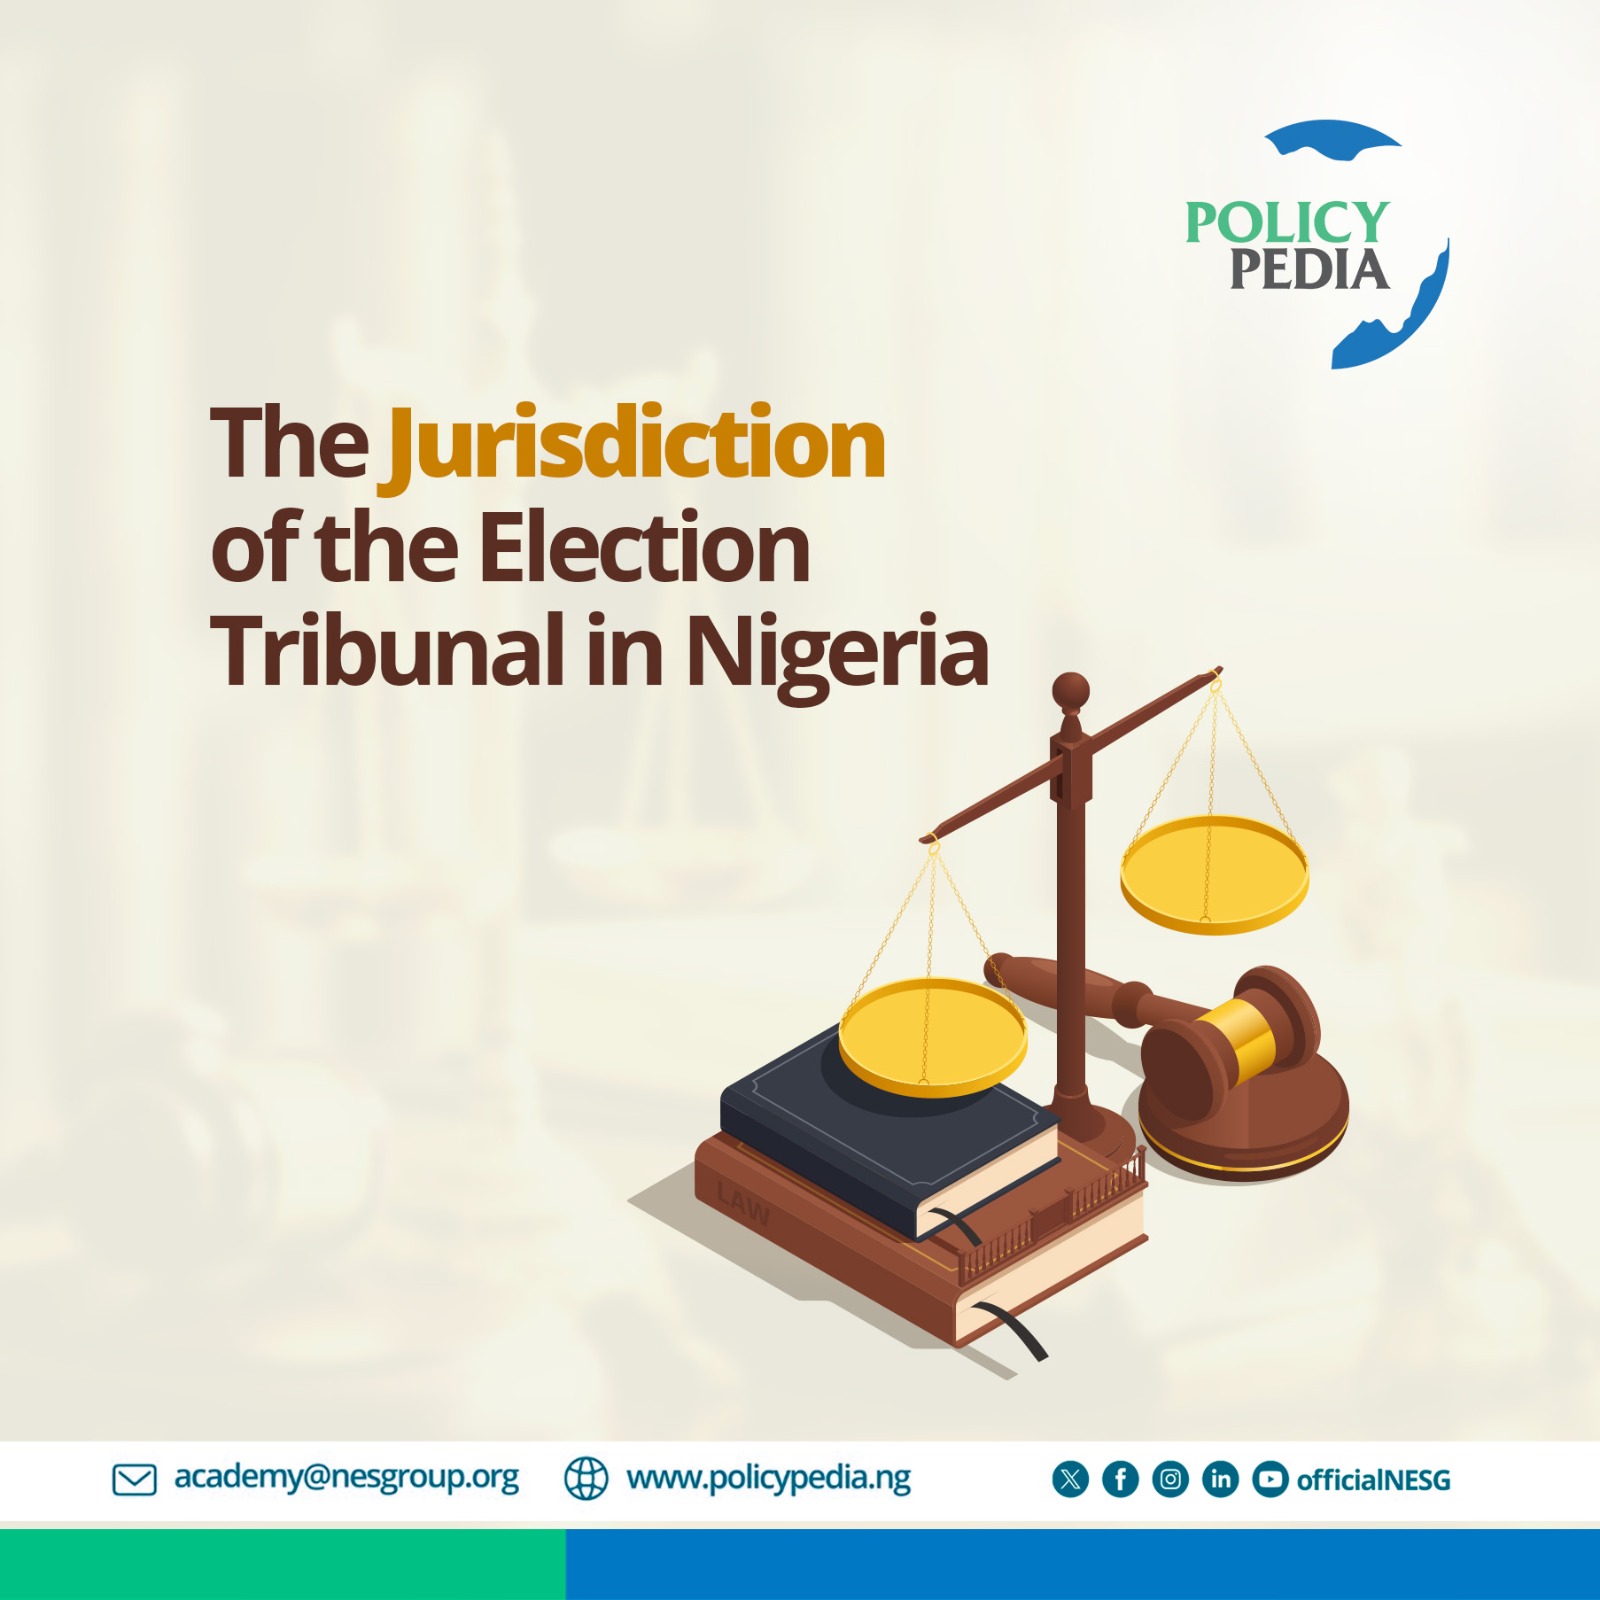 The Jurisdiction of the Election Tribunal in Nigeria